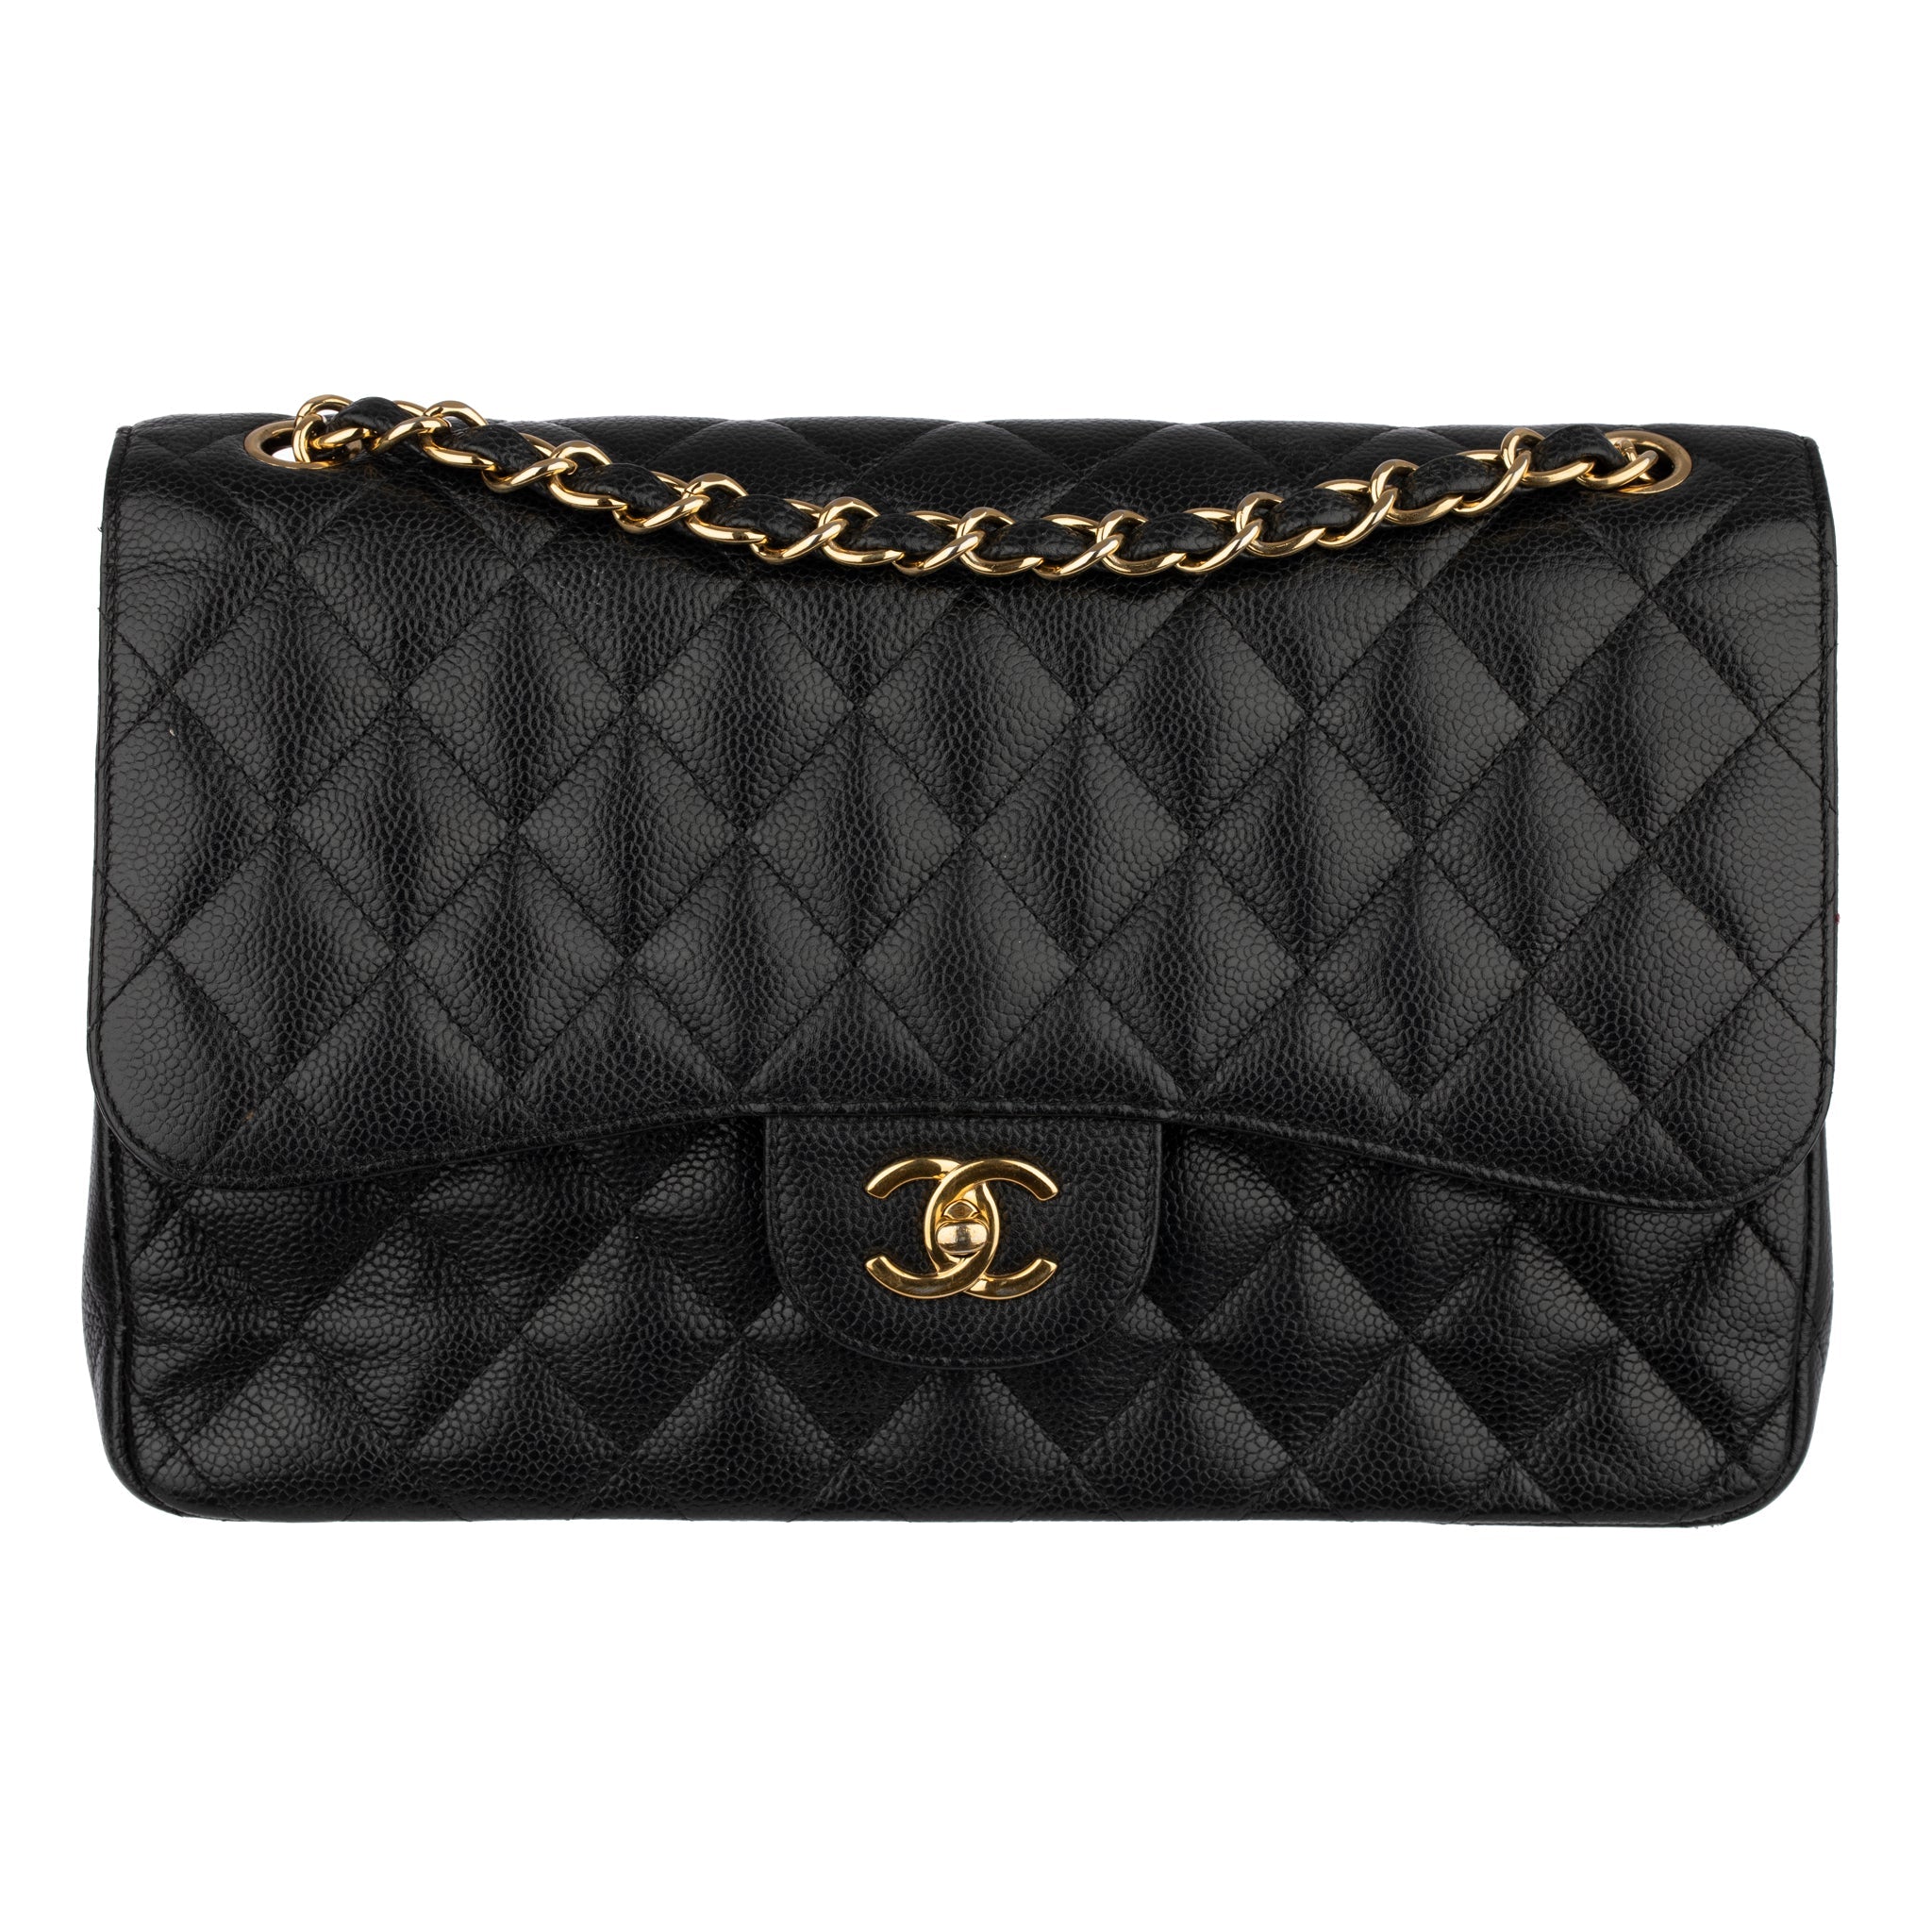 CHANEL CLASSIC JUMBO DOUBLE FLAP BLACK QUILTED CAVIAR LEATHER GOLD-TONE HARDWARE - On Repeat